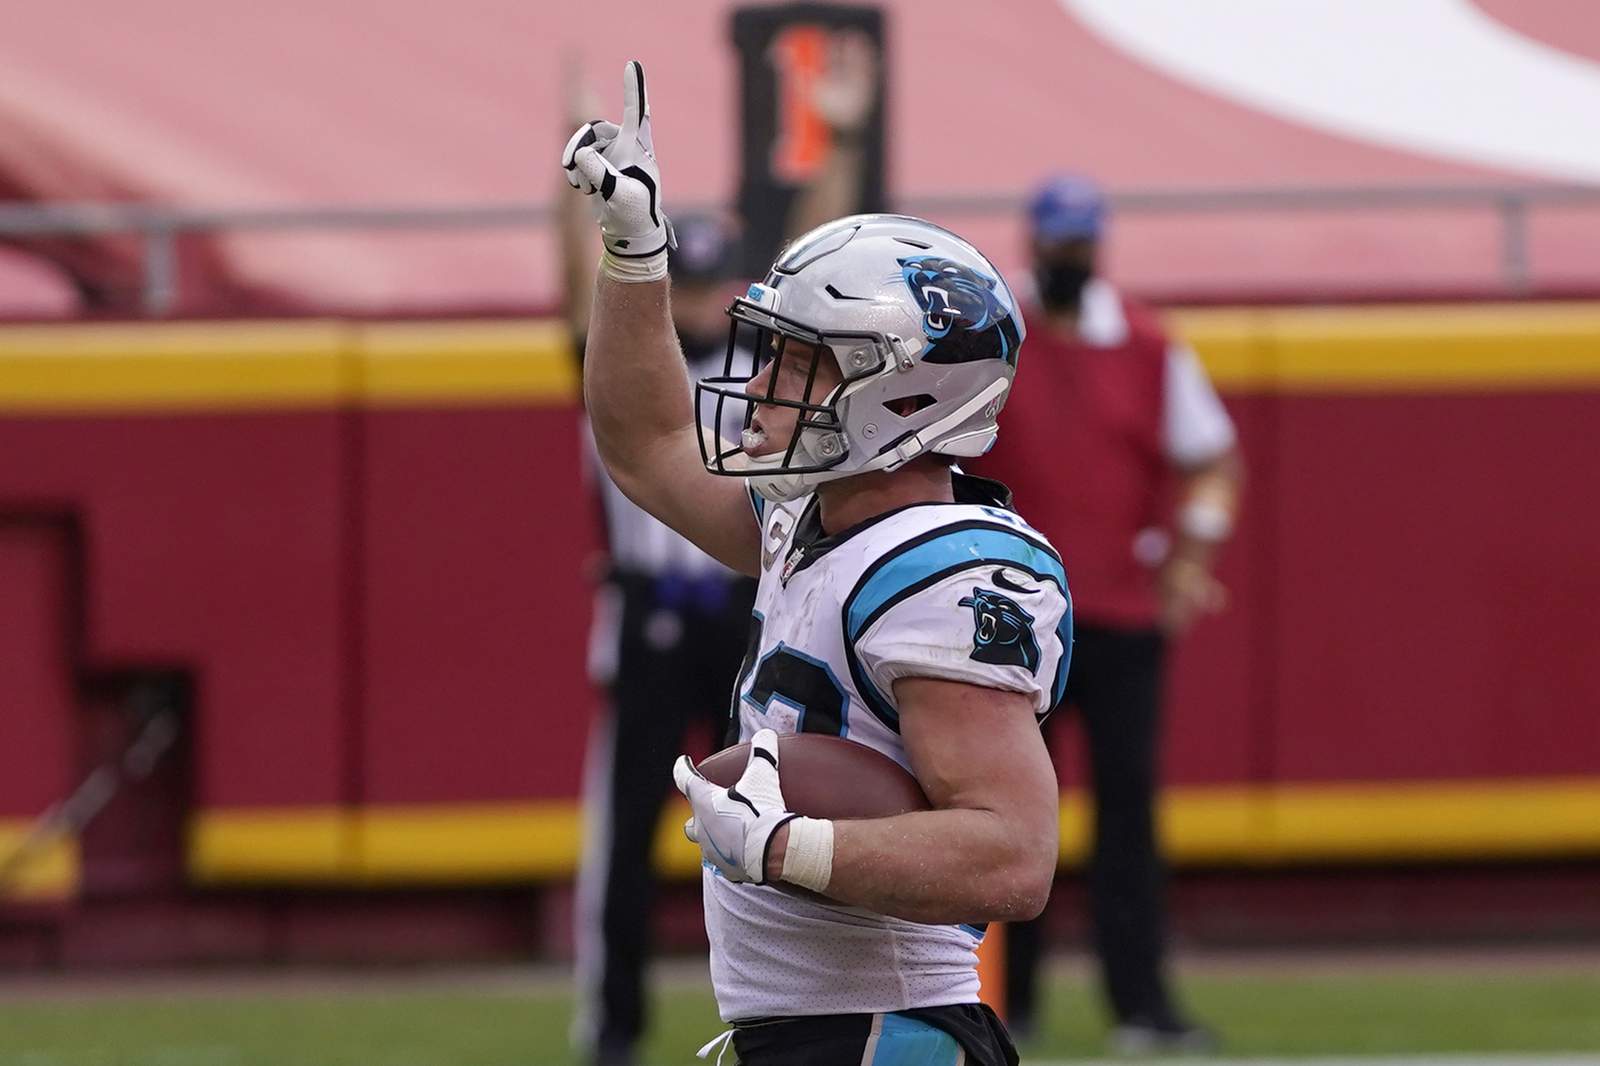 Panthers list McCaffrey as 'day to day' with shoulder injury